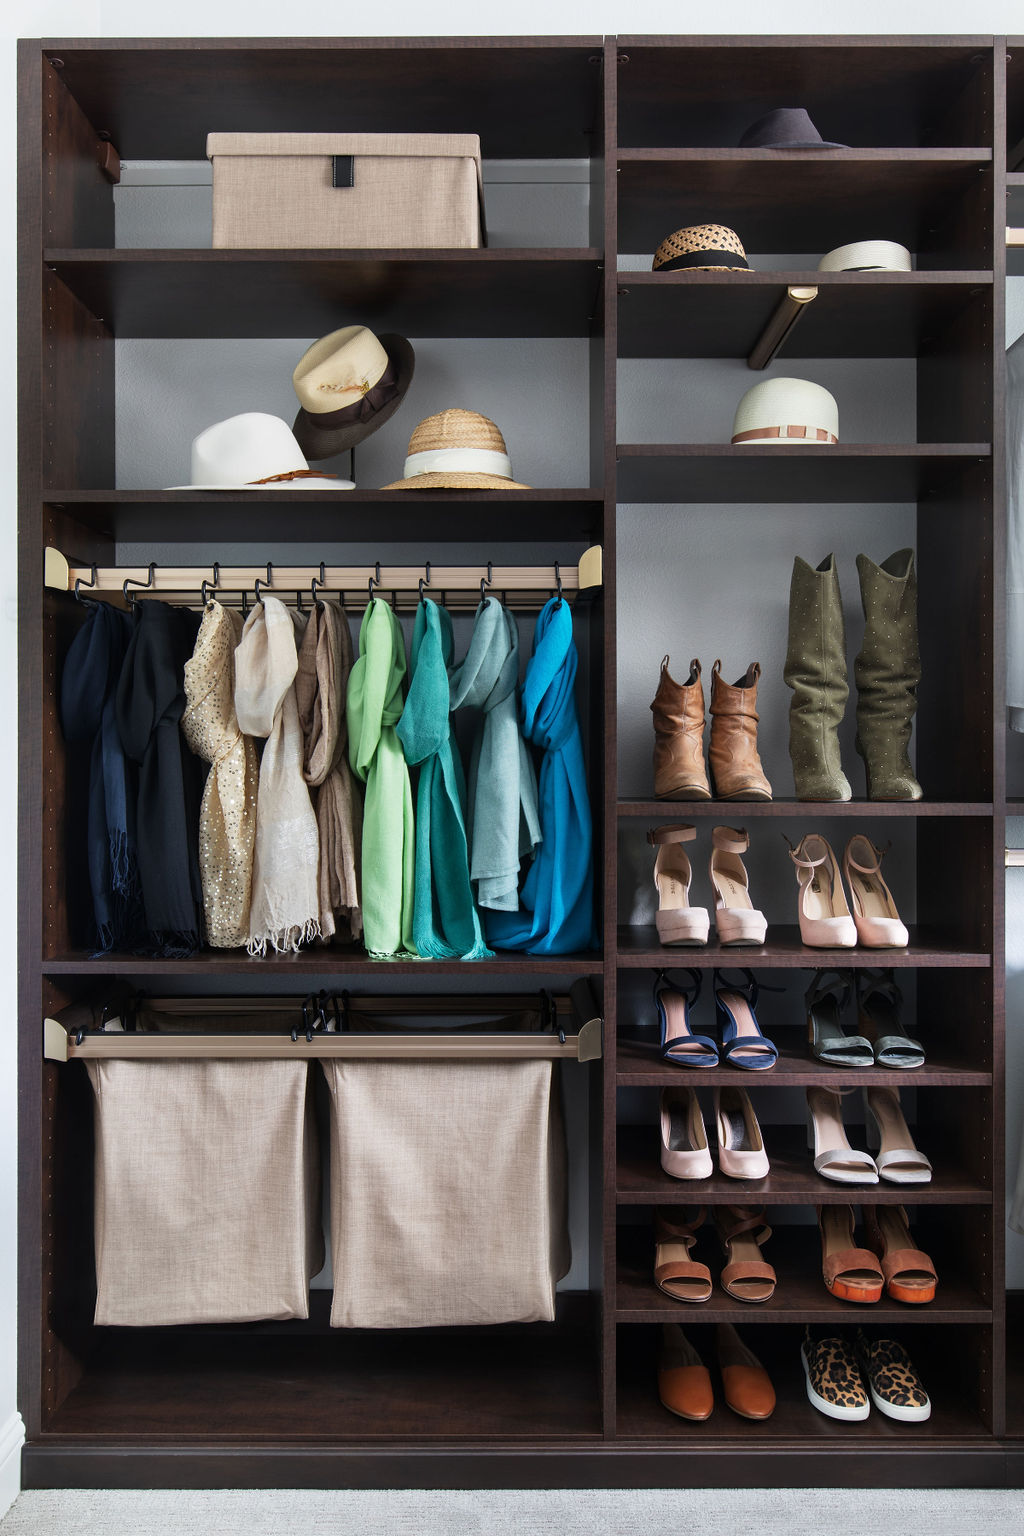 More Space Place custom-closet designers have specific training and experience to design solutions for your space, and they are familiar with what accessories are available to improve function. Iron away storage, wardrobe lifts, hampers, islands and benches are all functional additions to a custom closet. Talk with our closet designers today to learn more about our process.